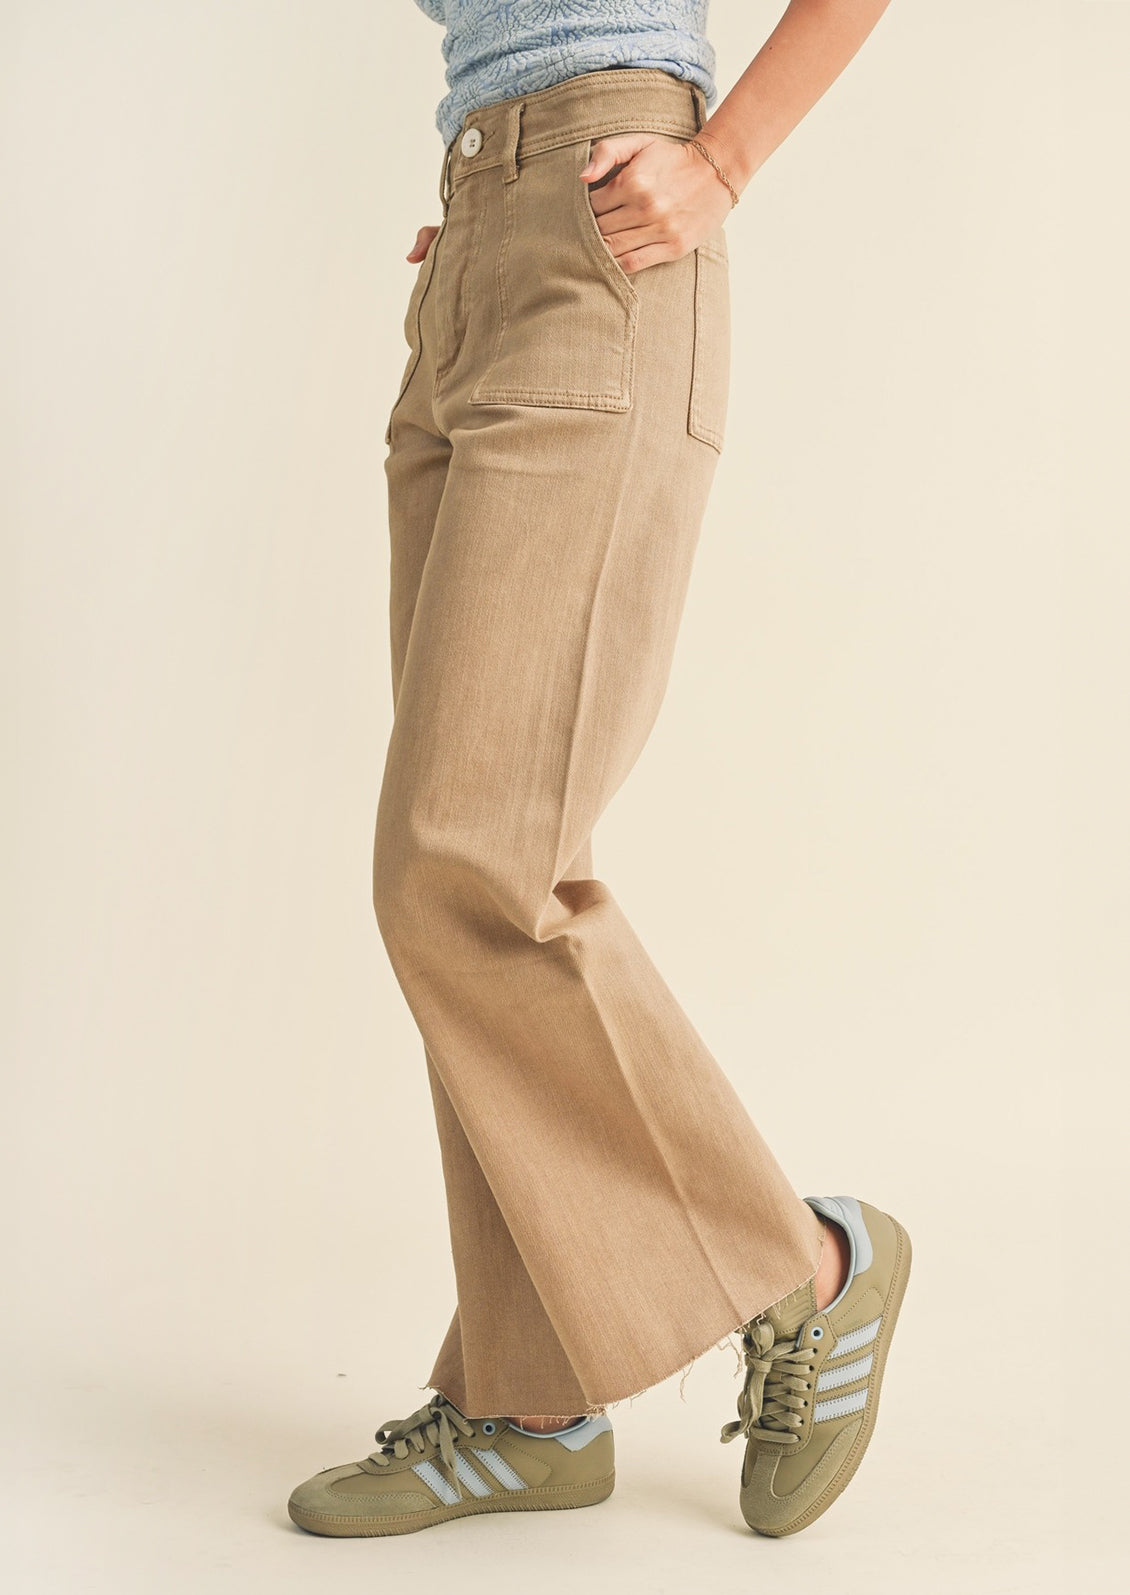 A pair of light brown wide leg pants with front patch pockets.